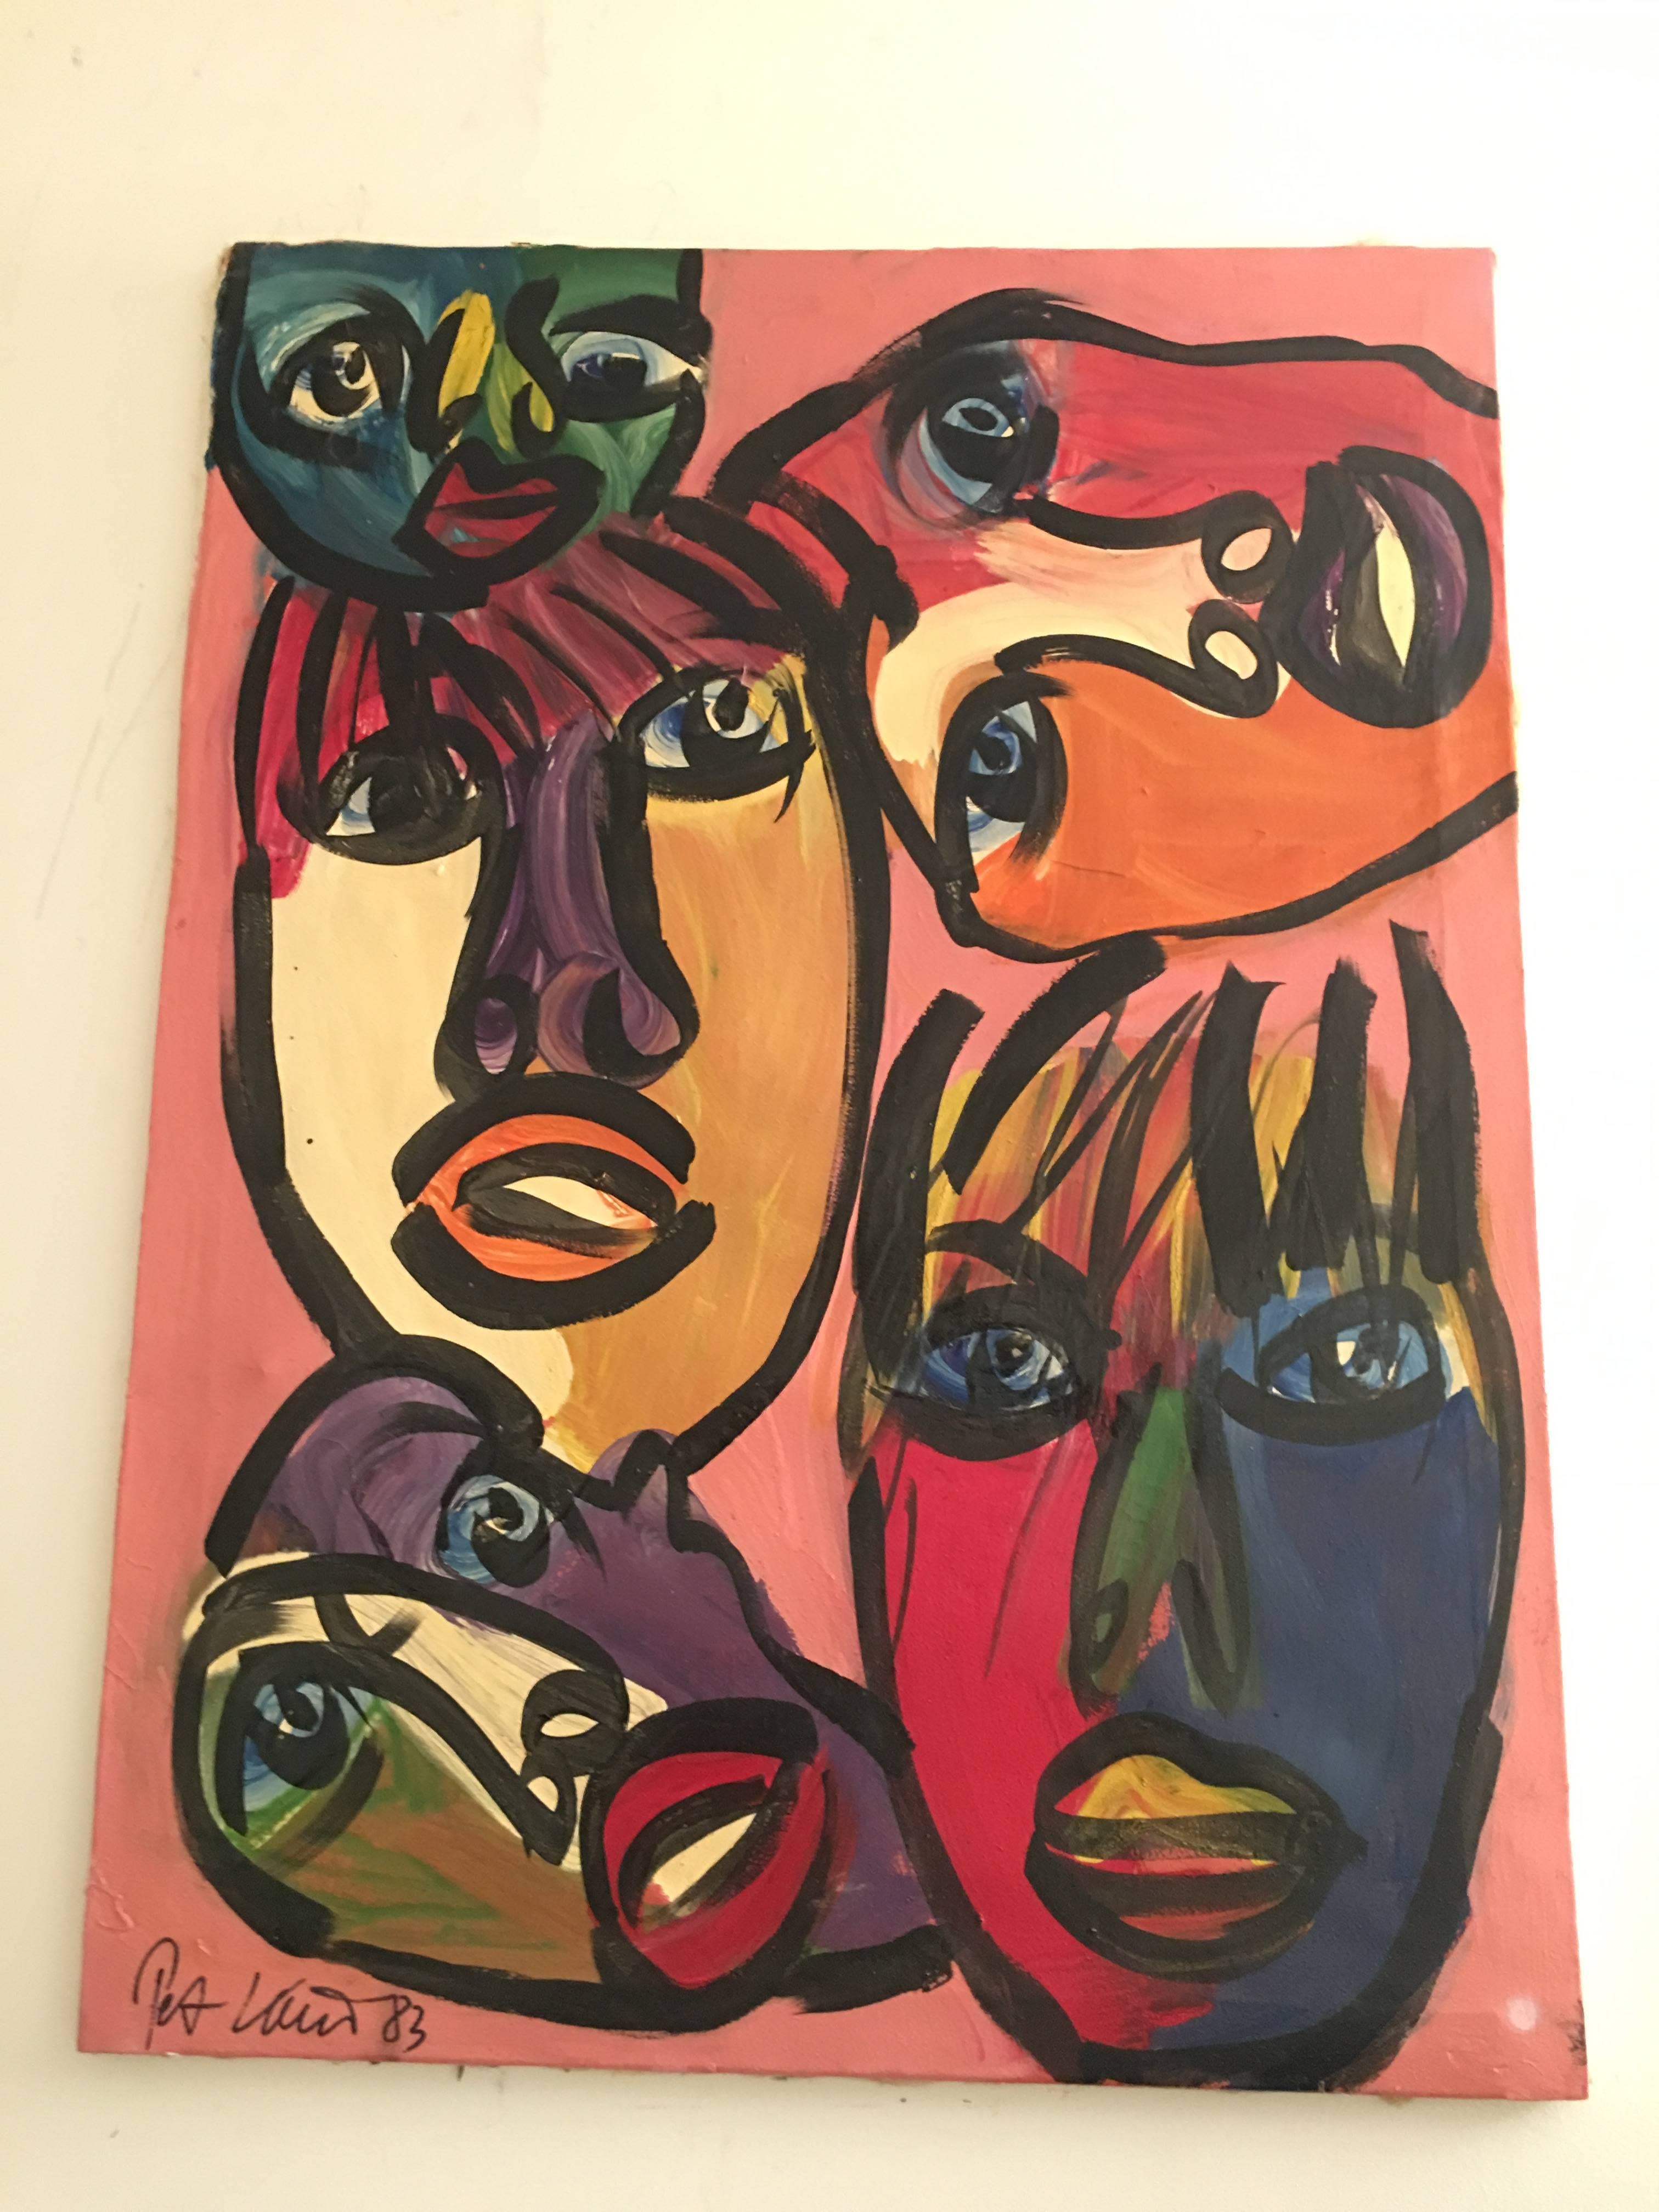 Terrific abstract painting by listed German artist Peter Keil. Painting depicts colorful abstract faces in oil paint executed on canvas. Signed and dated 1983.